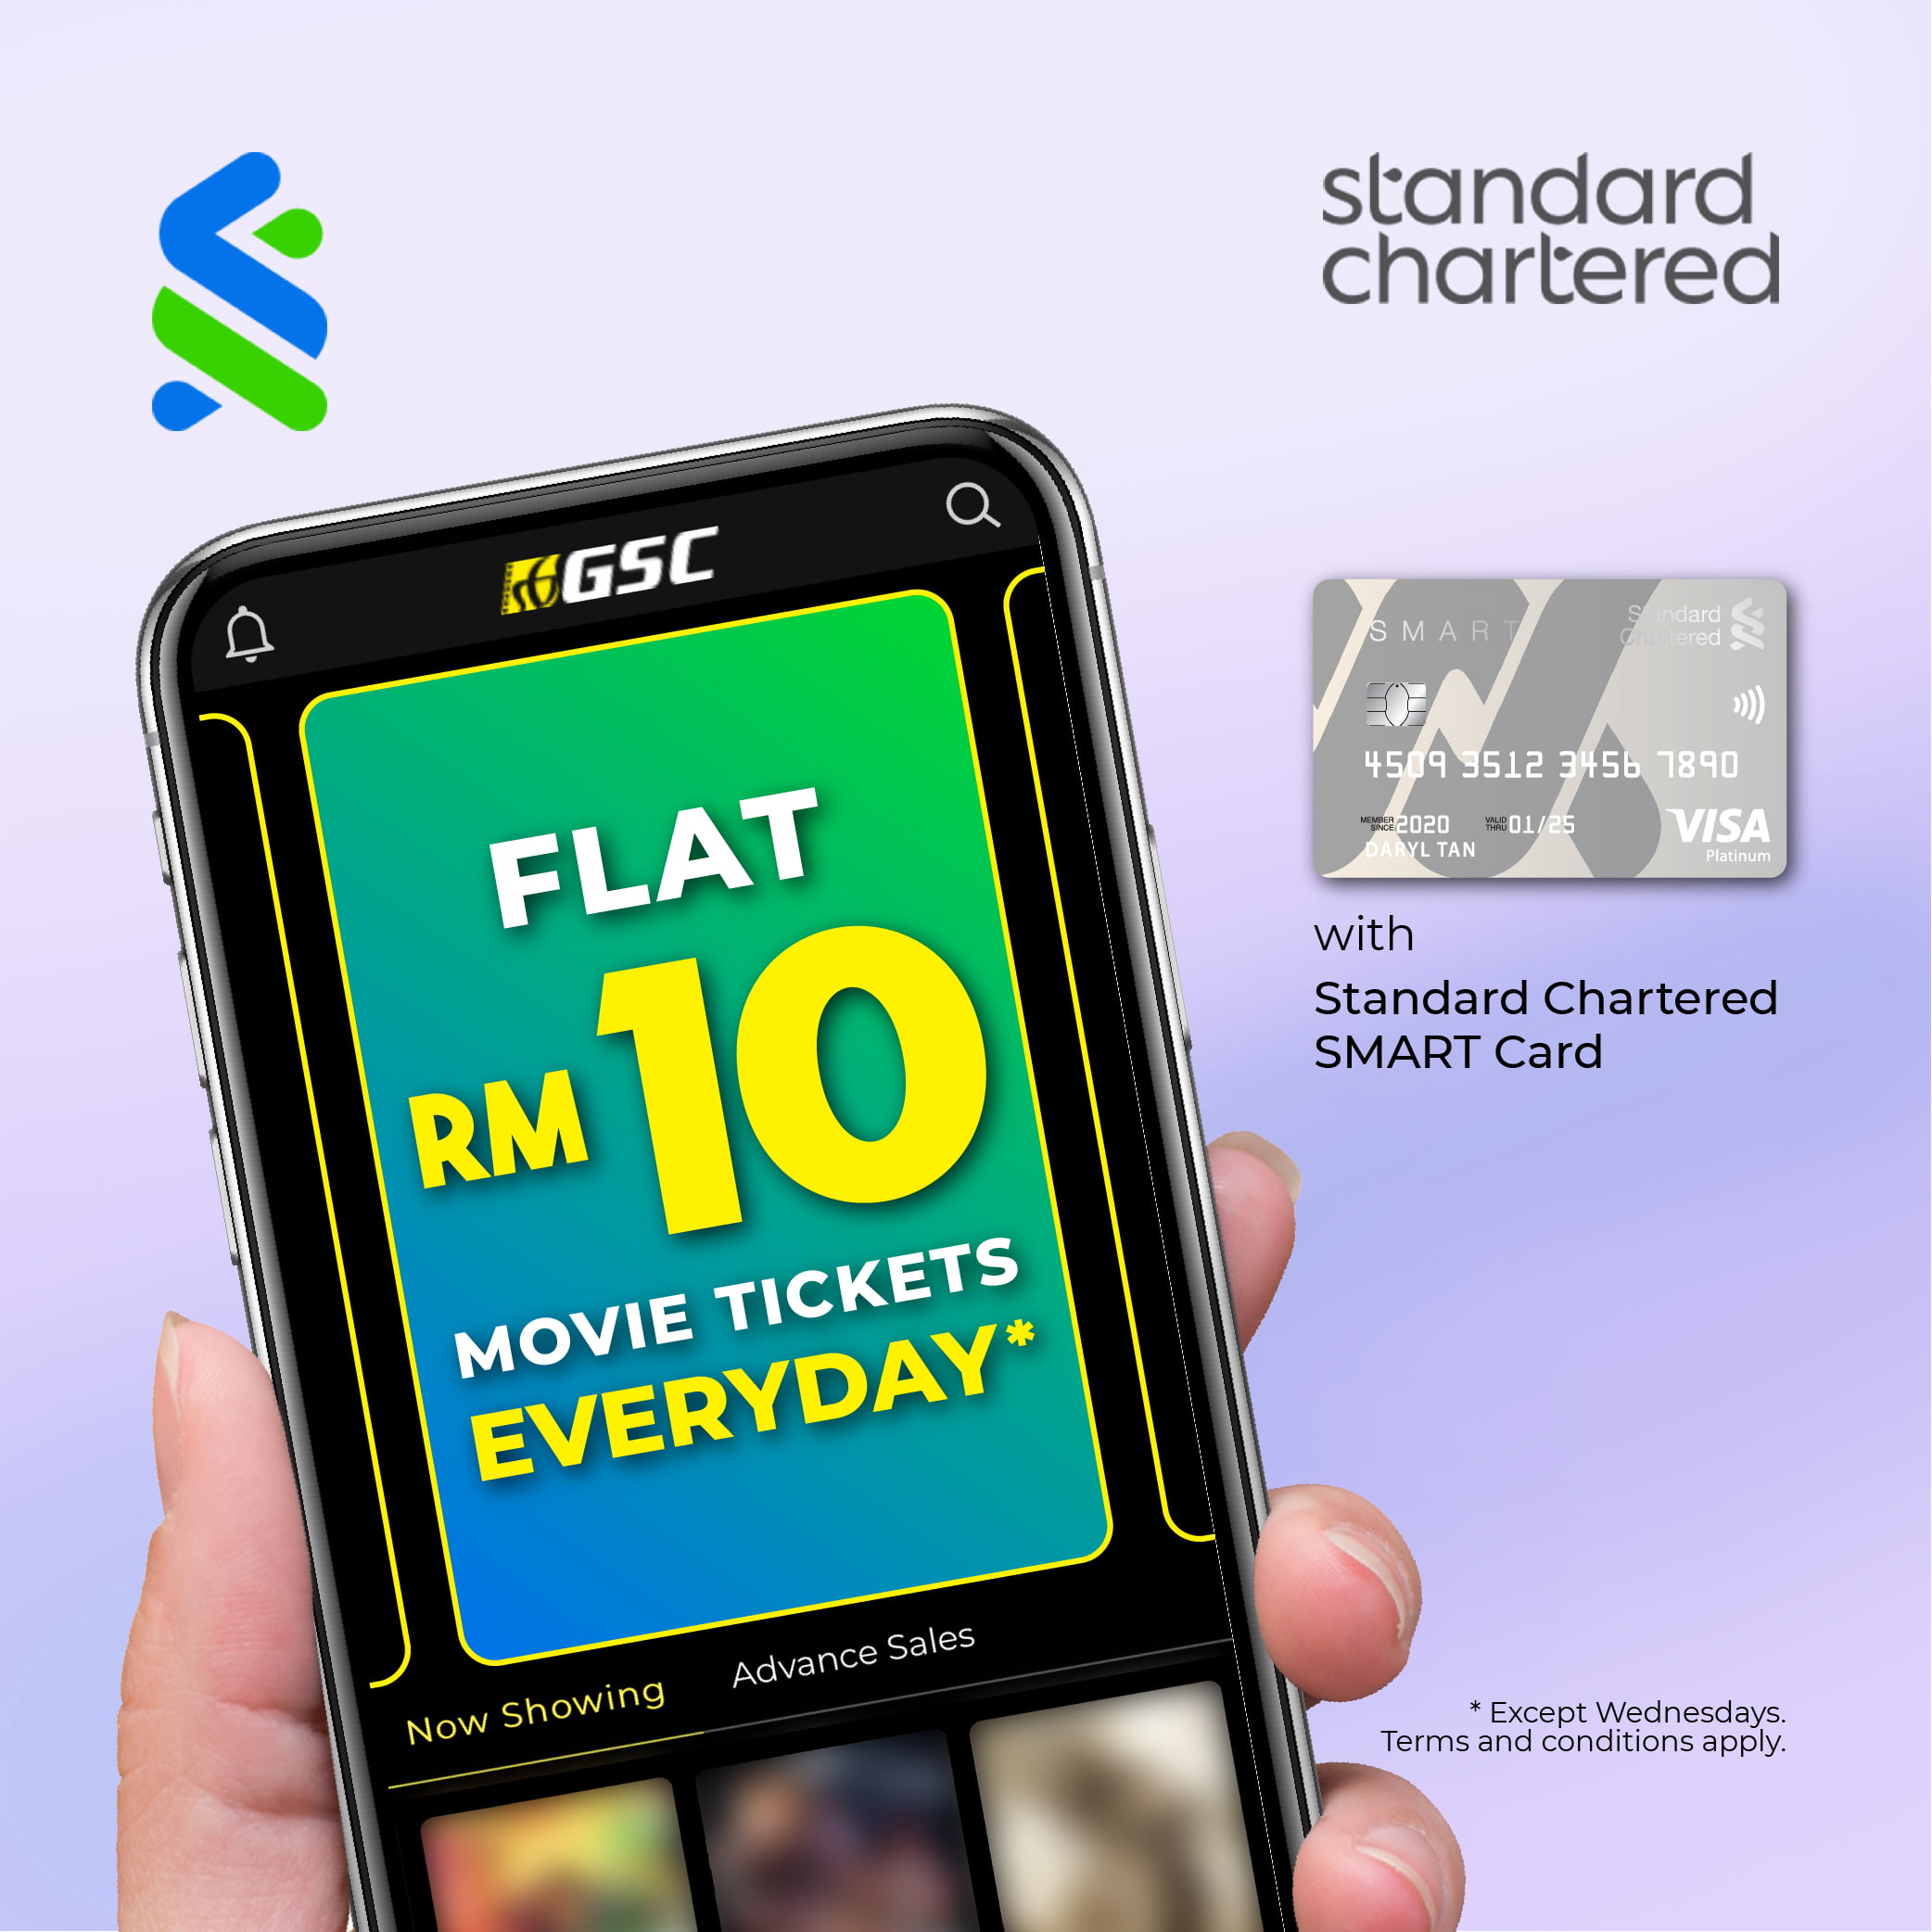 gsc-movie-ticket-price-rm10-for-standard-chartered-smart-cardmembers